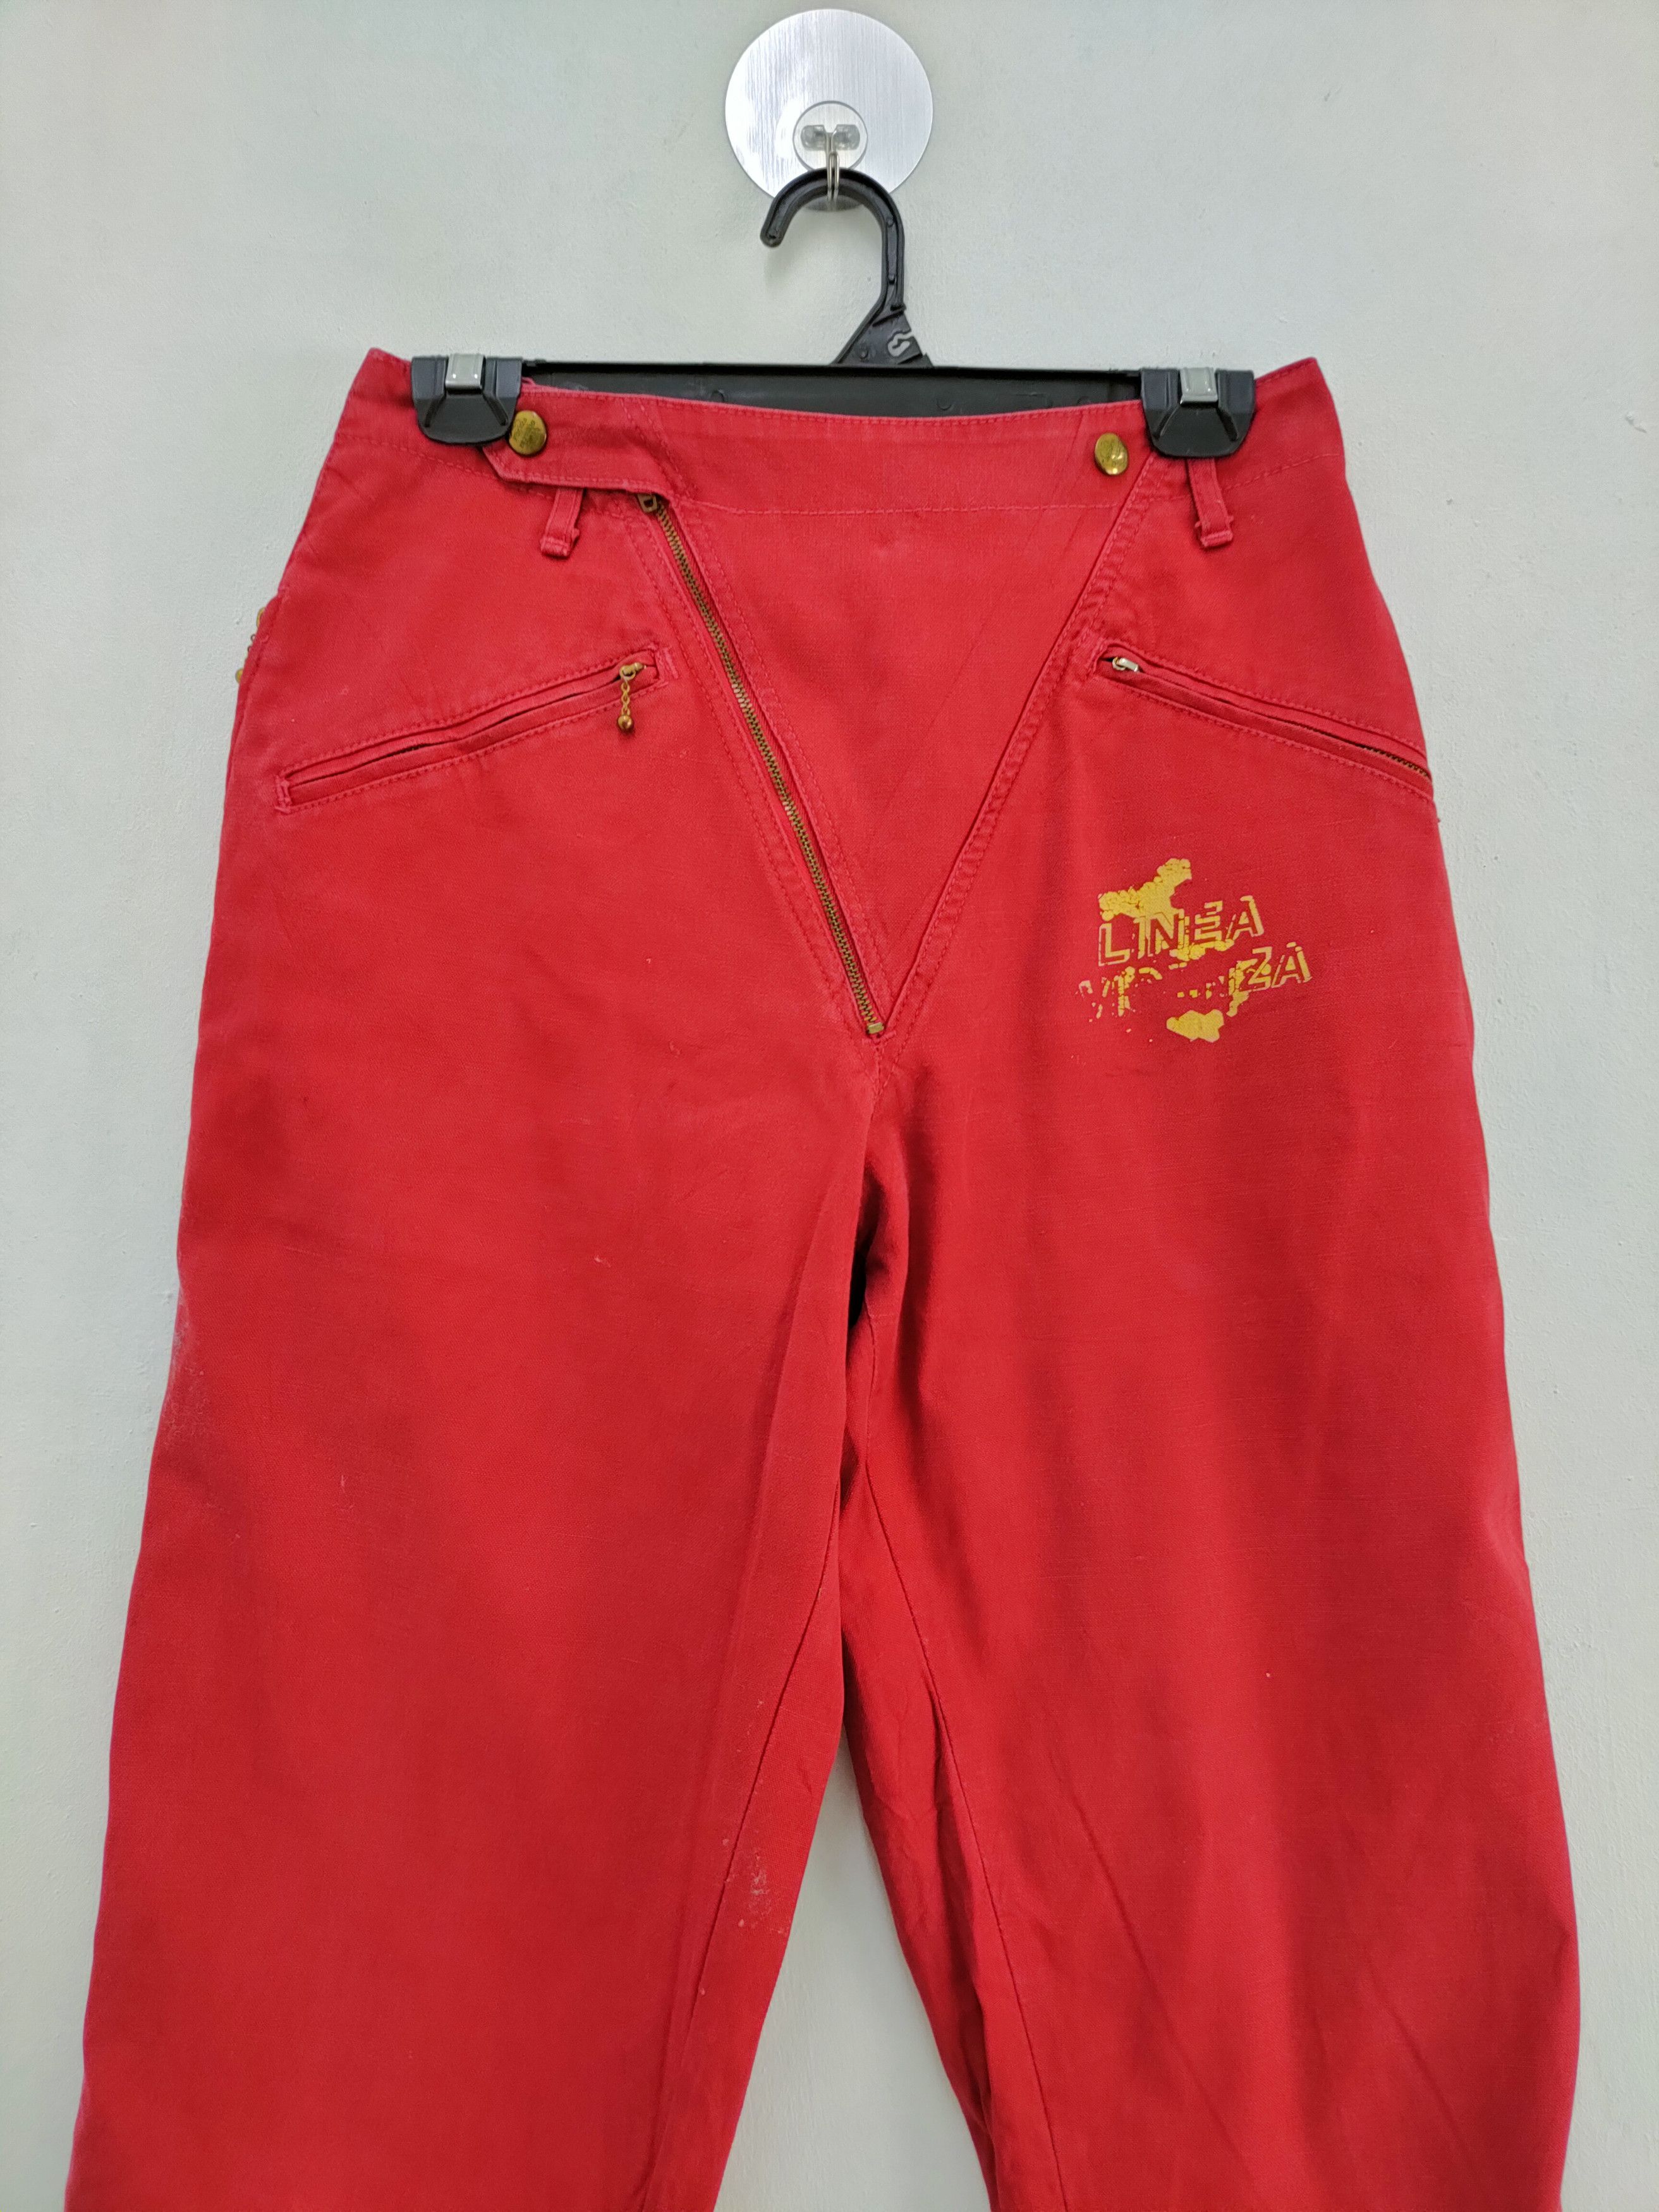 Linea Linea Vicenza Red Pants Made In Japan Size US 26 / EU 42 - 3 Thumbnail